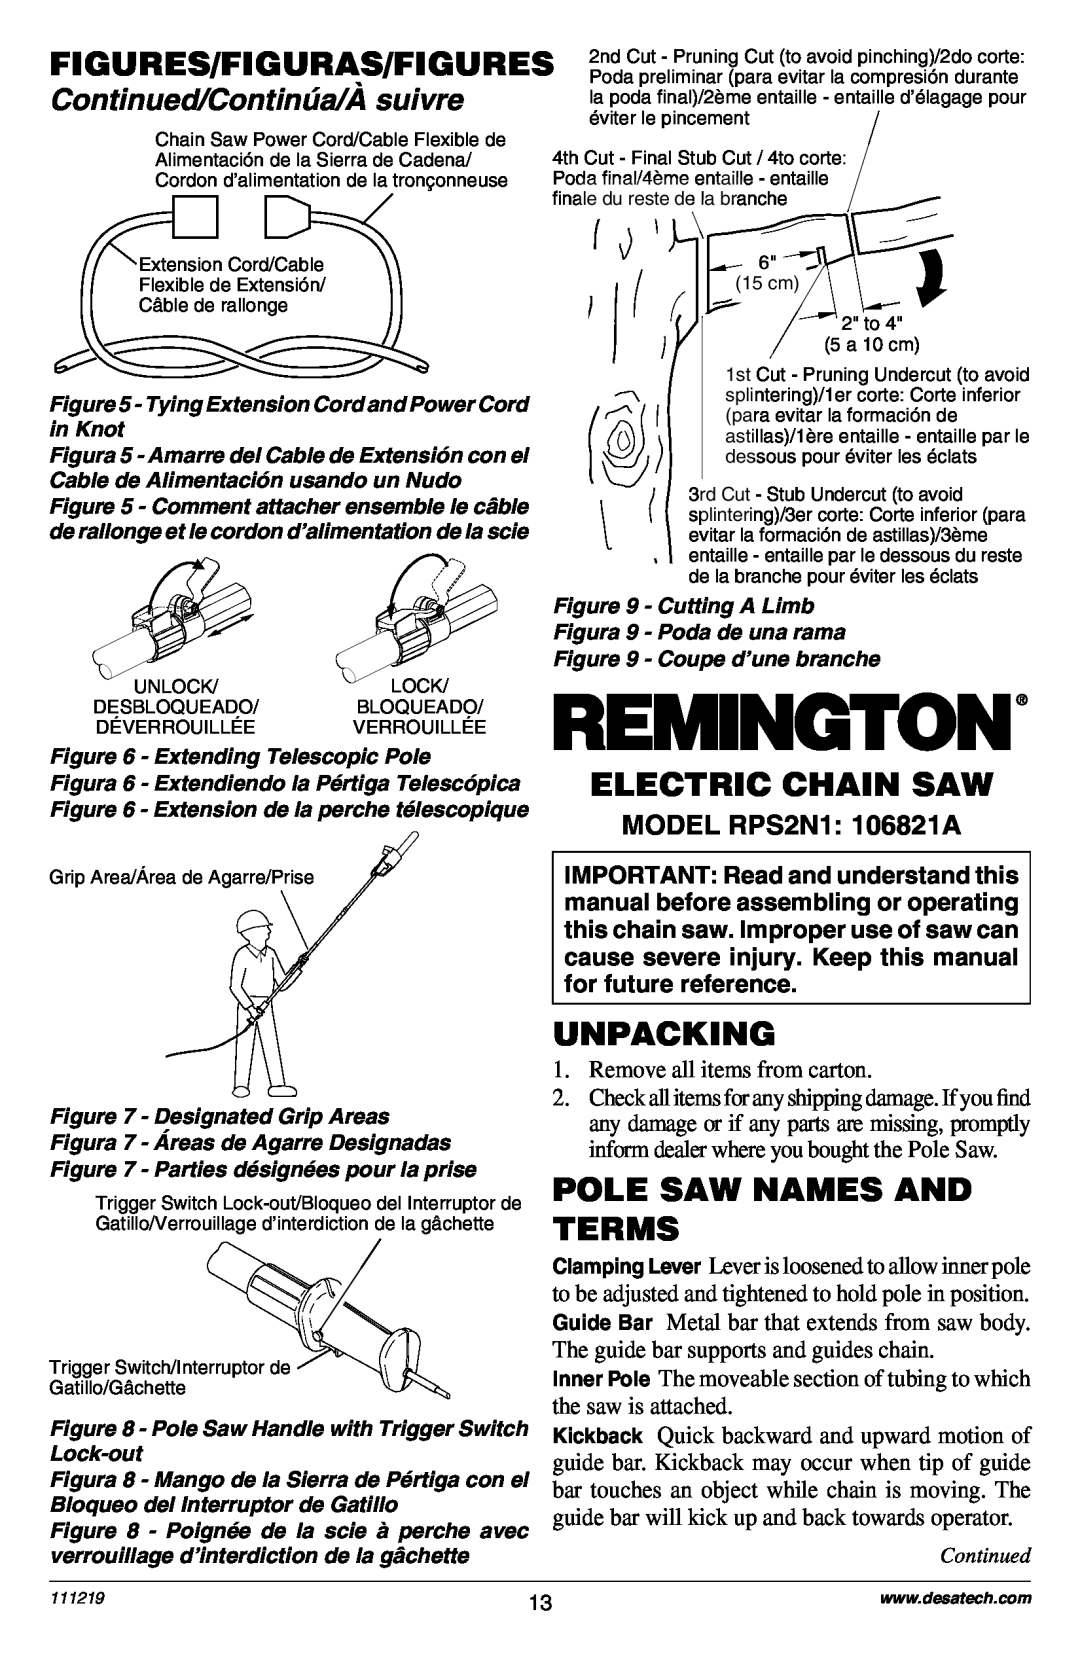 Remington RPS2N1: 106821A Electric Chain Saw, Unpacking, Pole Saw Names And Terms, Continued/Continœa/Ë suivre, in Knot 